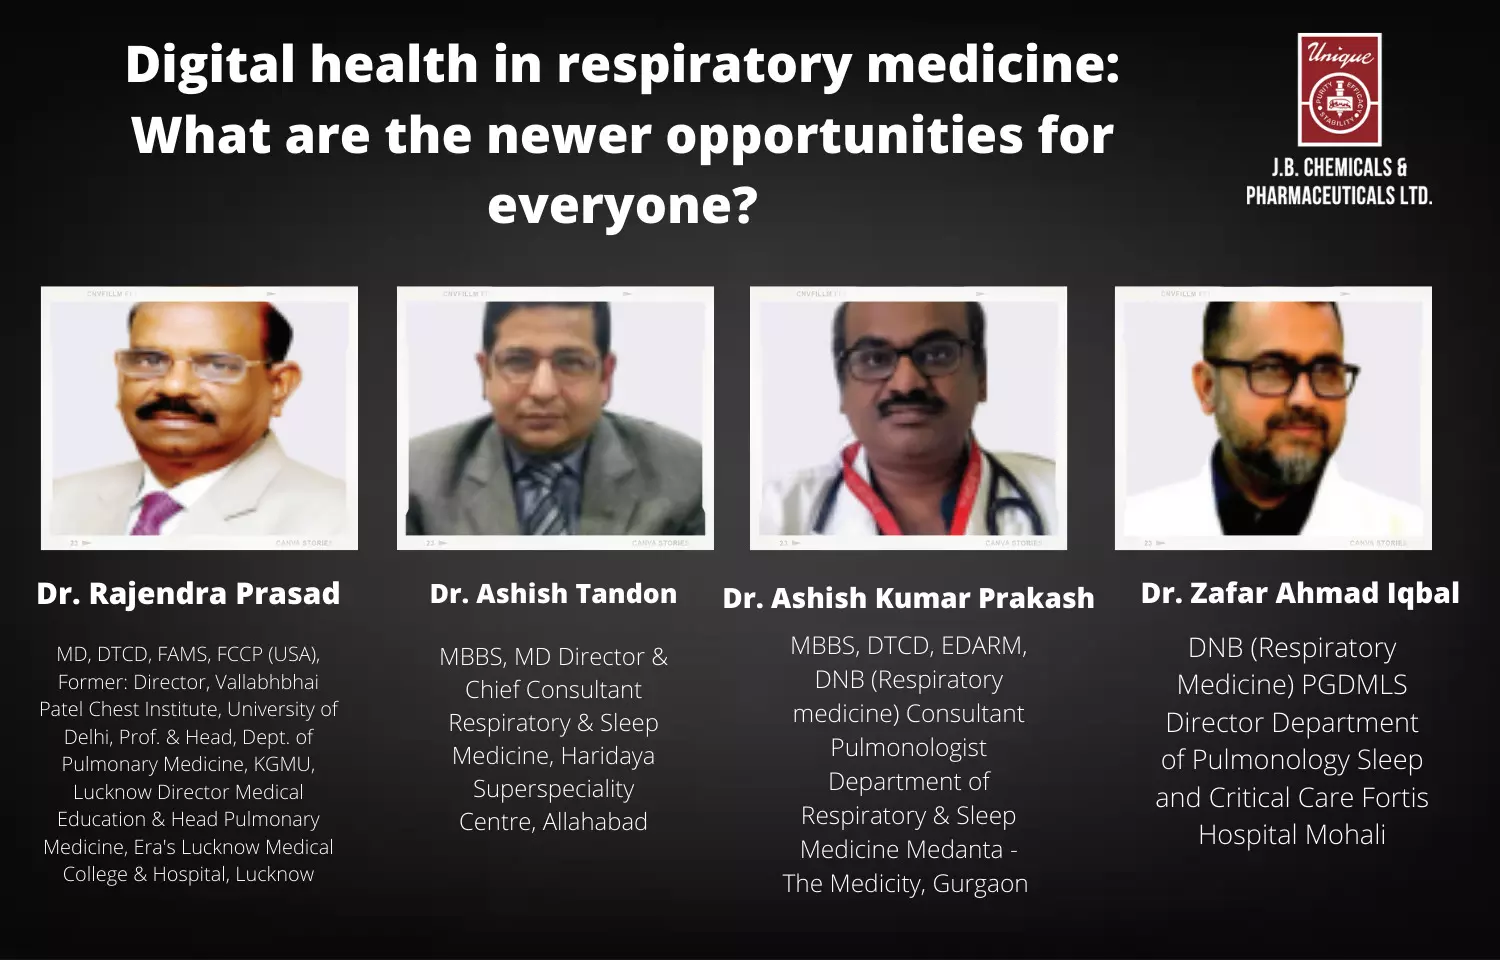 Digital health in respiratory medicine: What are the newer opportunities for everyone?